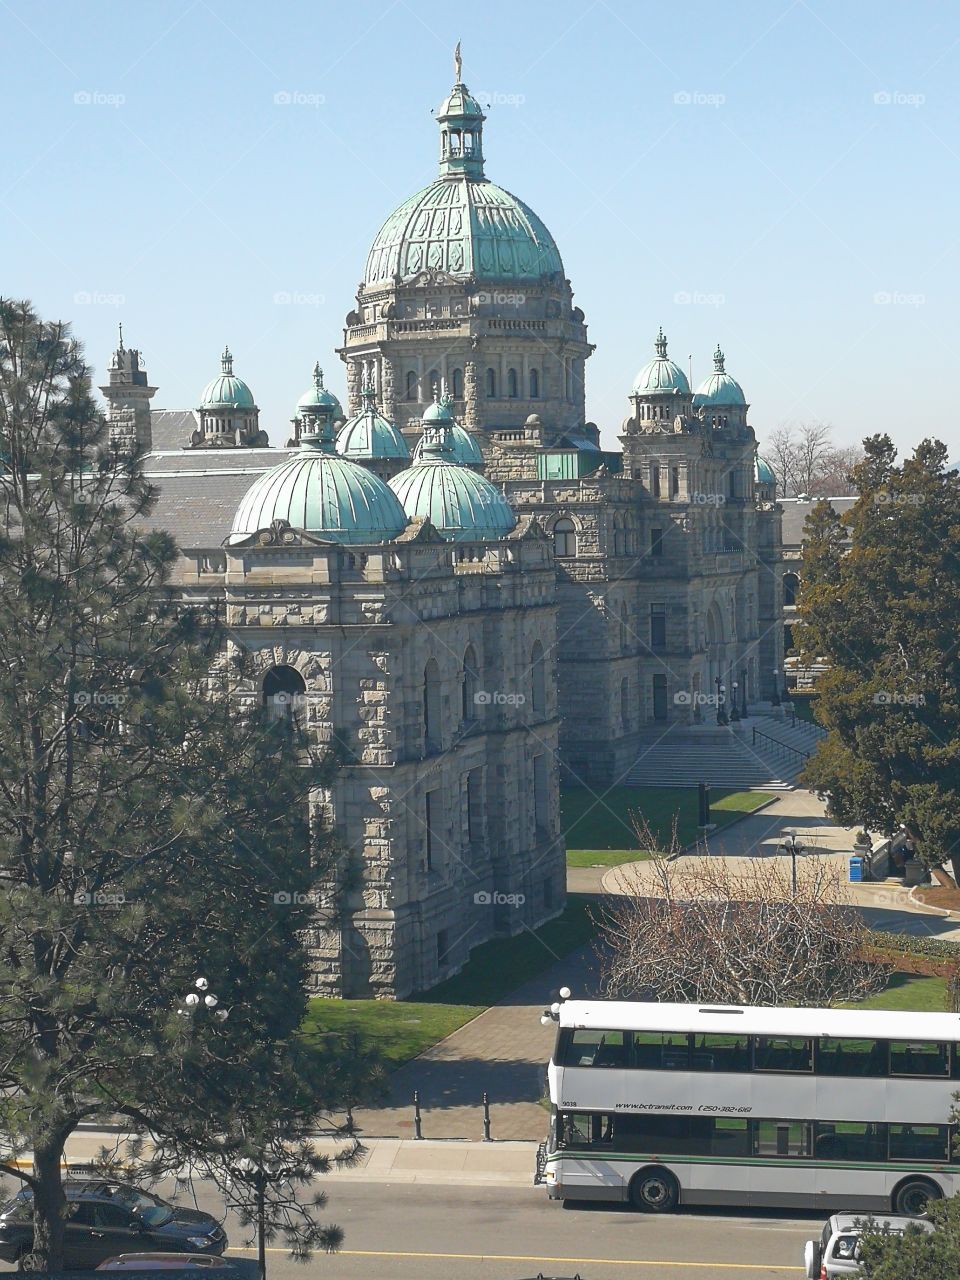 A view of the Victoria Parliament Building in Victoria, BC